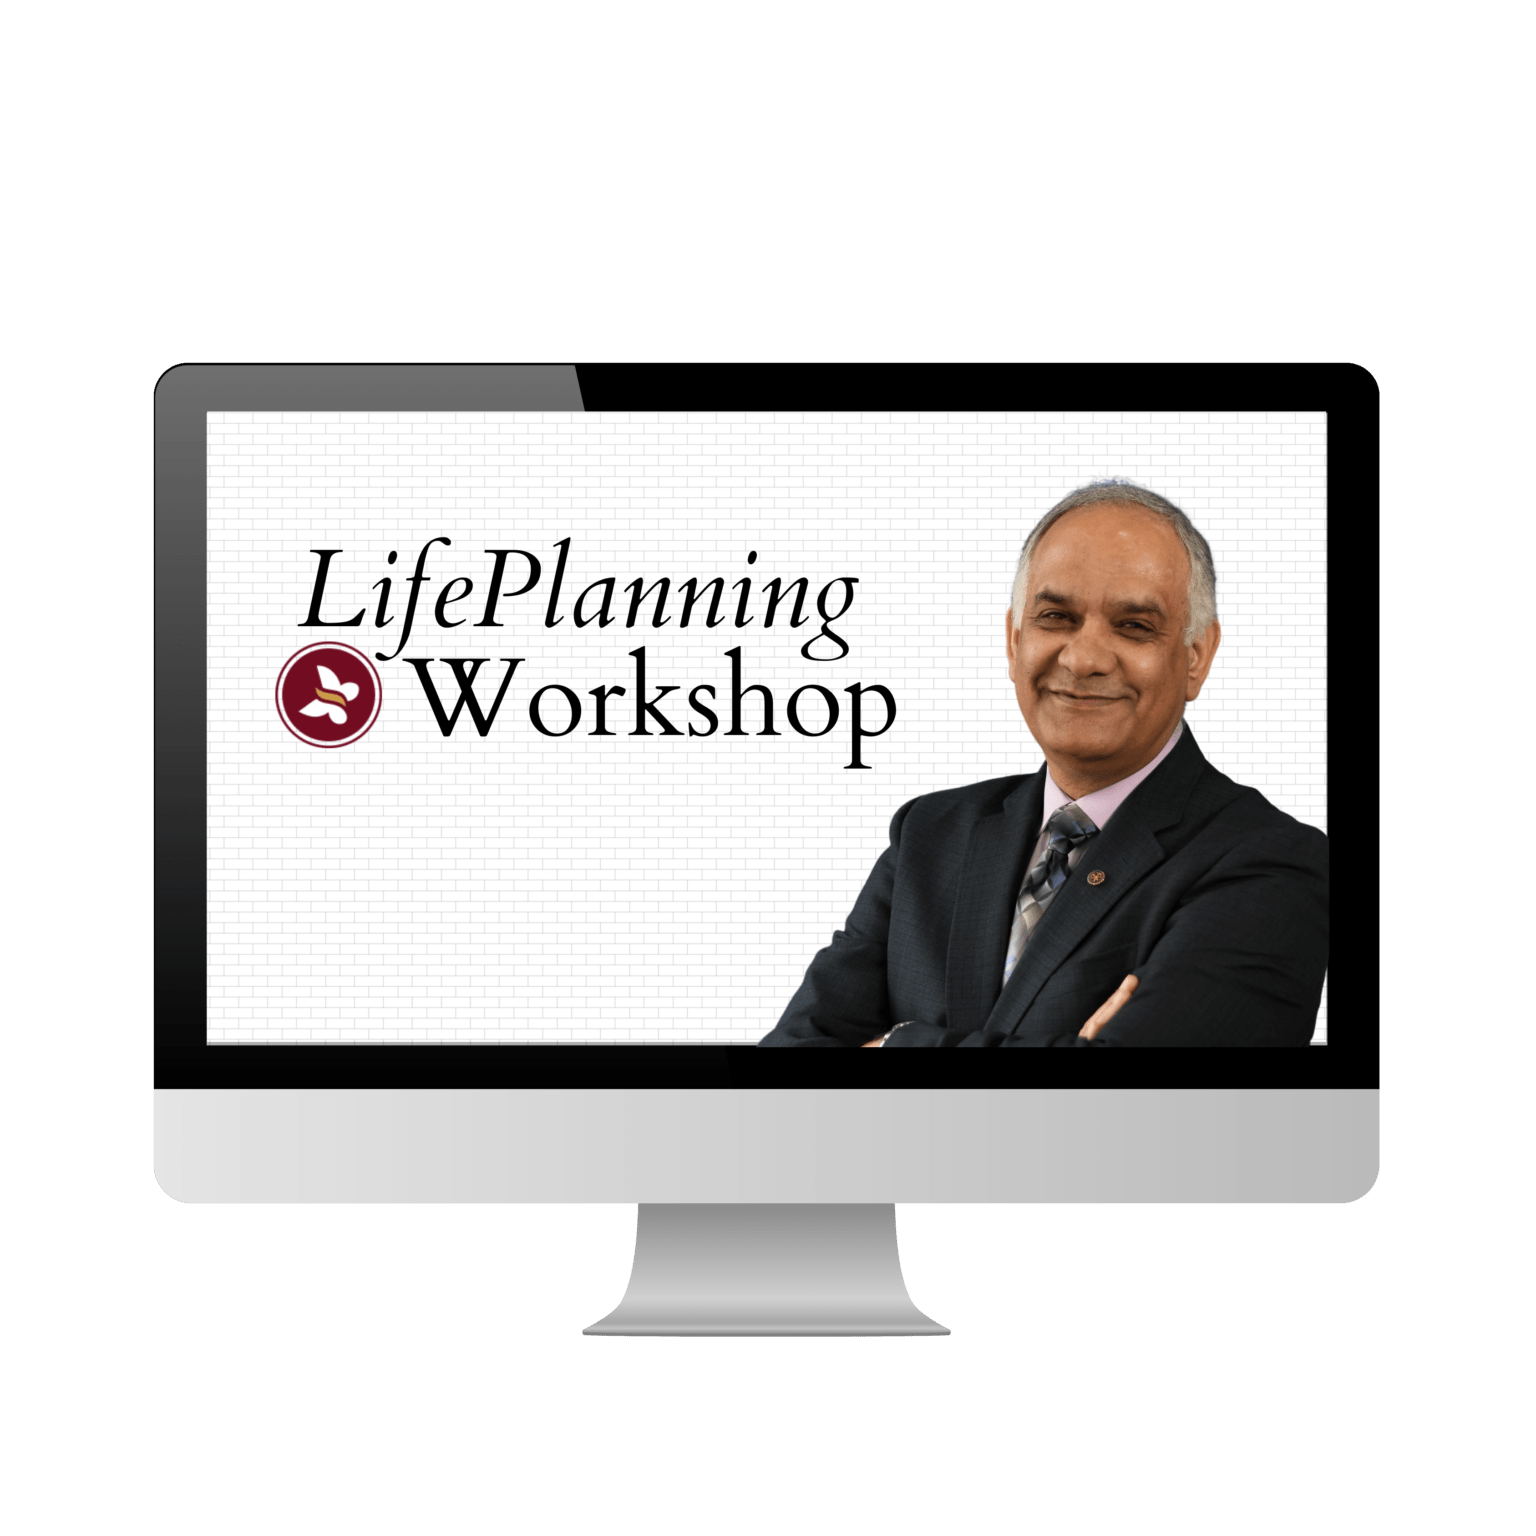 Create your LifePlan for retirement with help from courses, workshops, and expert LifePlanners.